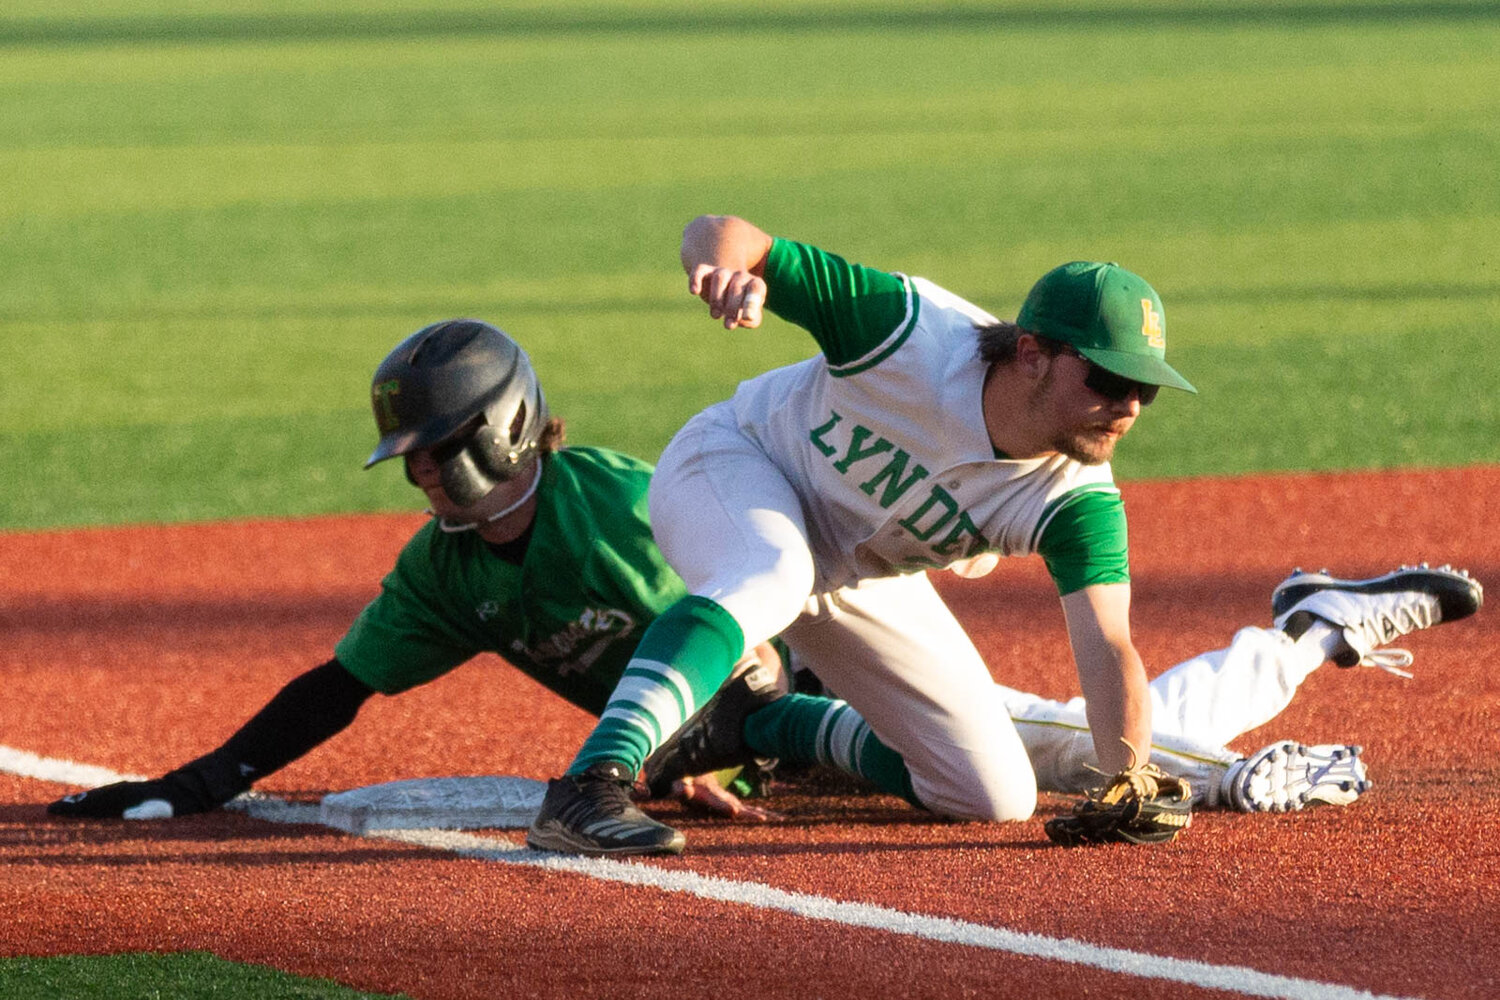 Tumwater's Brayden Oram slides into third base safely against Lynden in the 2A state title game at Joe Martin Stadium in Bellingham May 27.